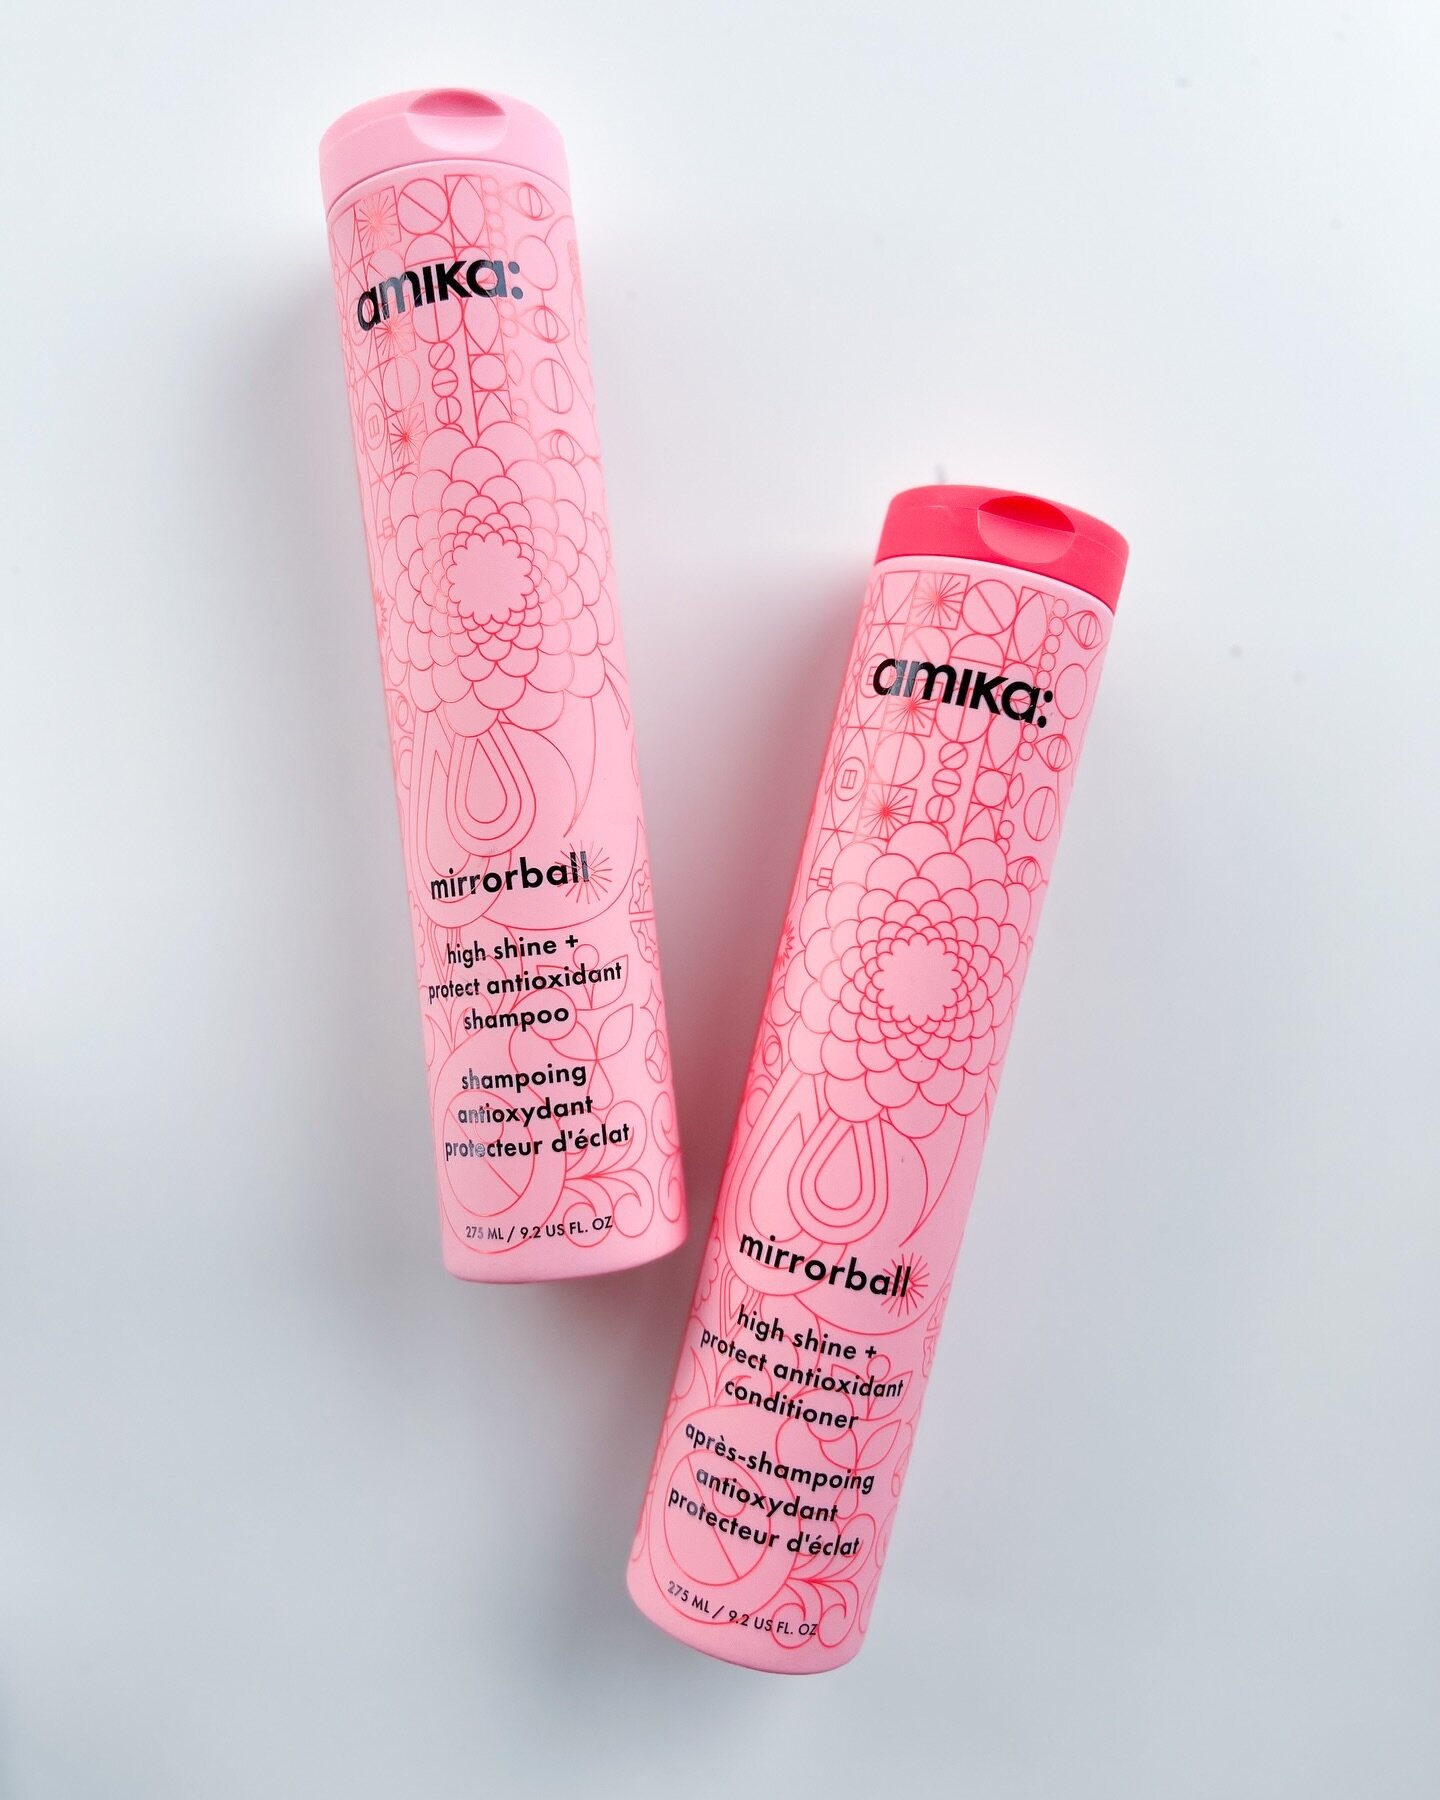 Take a shine to lustrous locks💗🌸✨🪩

Infused with grape leaf extract, raspberry extract, magnolia extract, and sea buckthorn, this shine-inducing shampoo and conditioner system offers lightweight moisture while boosting hair color vibrancy. Antioxi